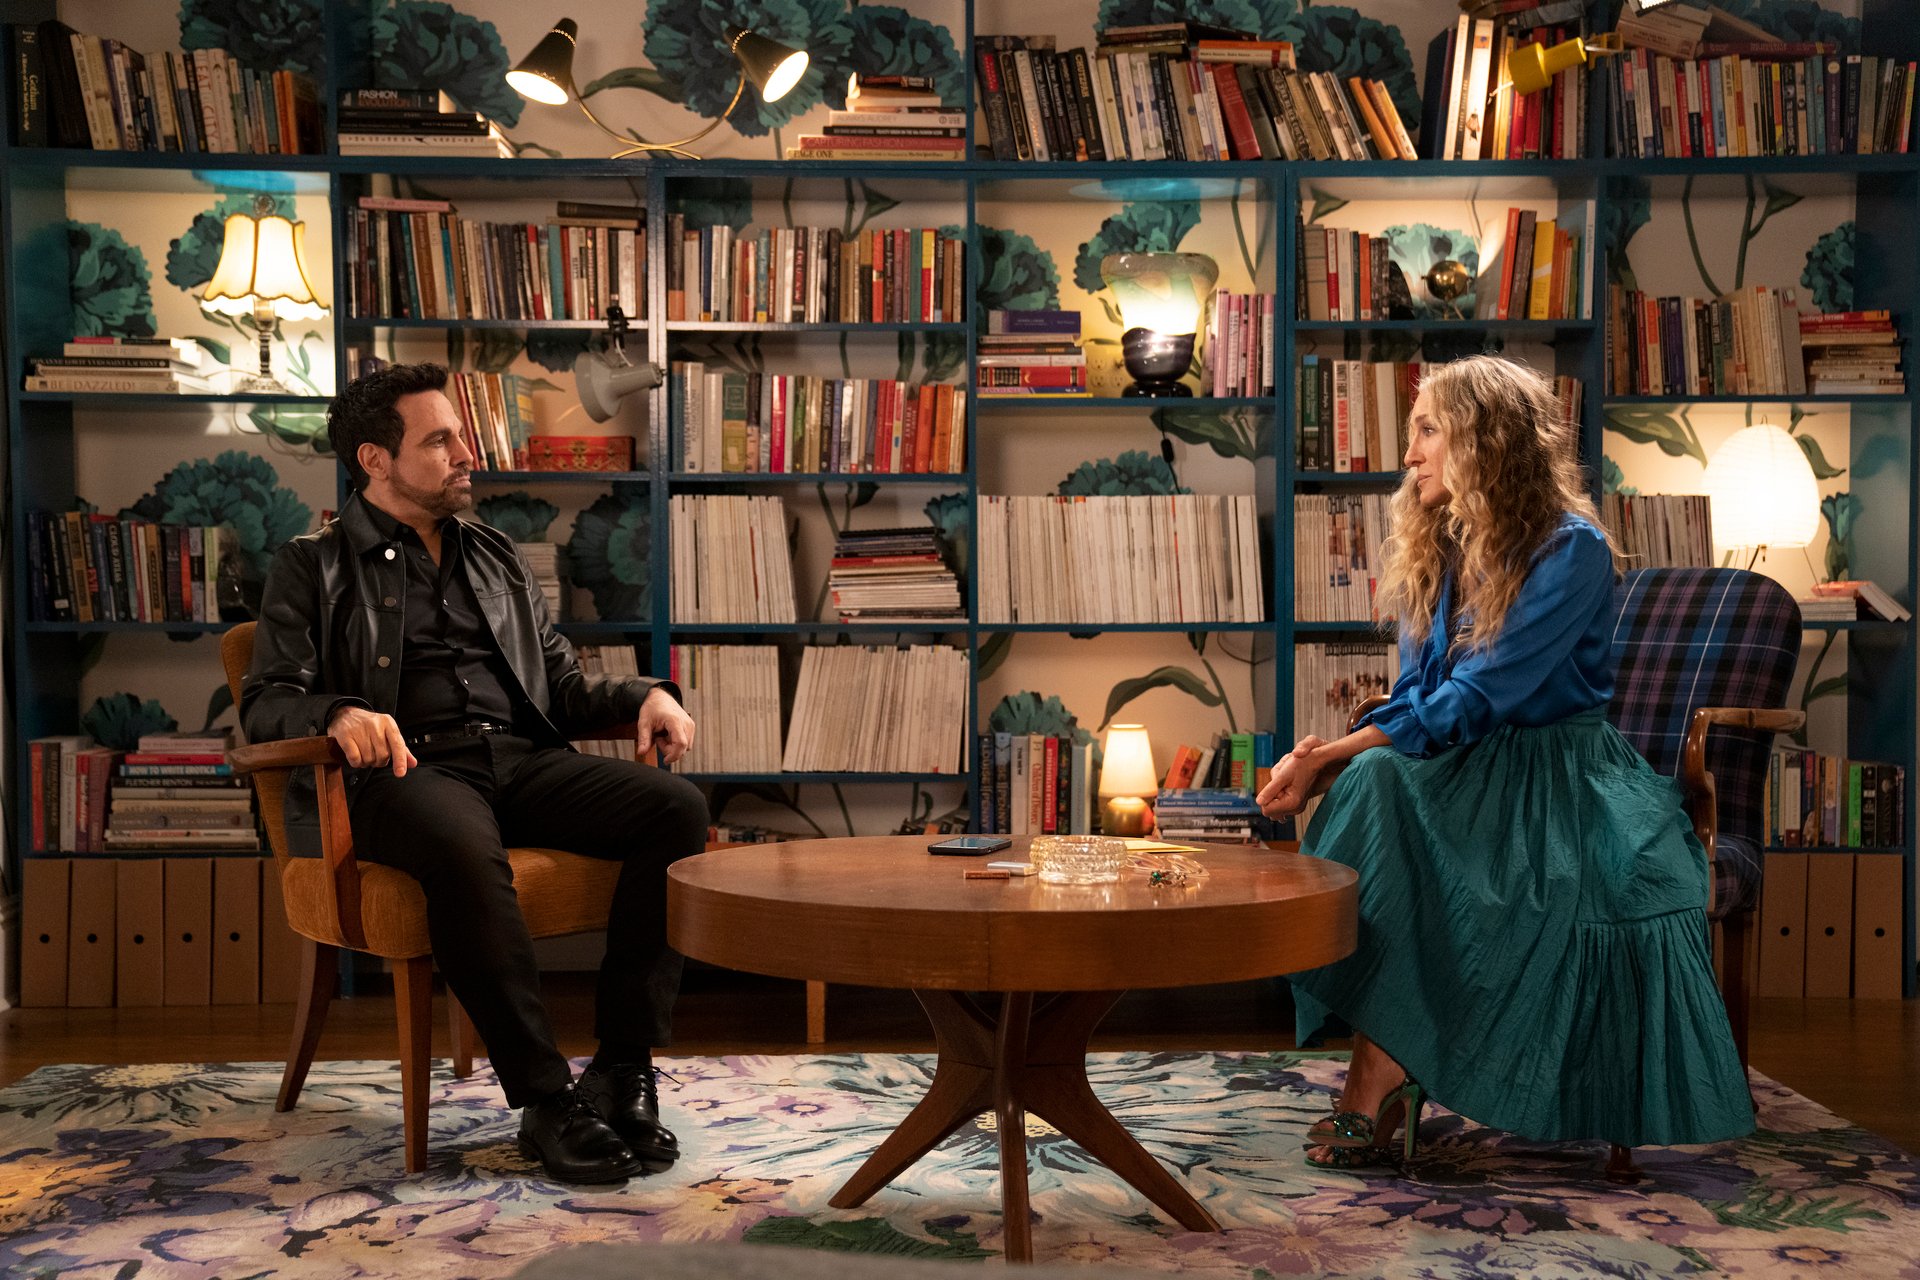 Mario Cantone and Sarah Jessica Parker sit in Carrie's apartment during a scene in 'And Just Like That...'